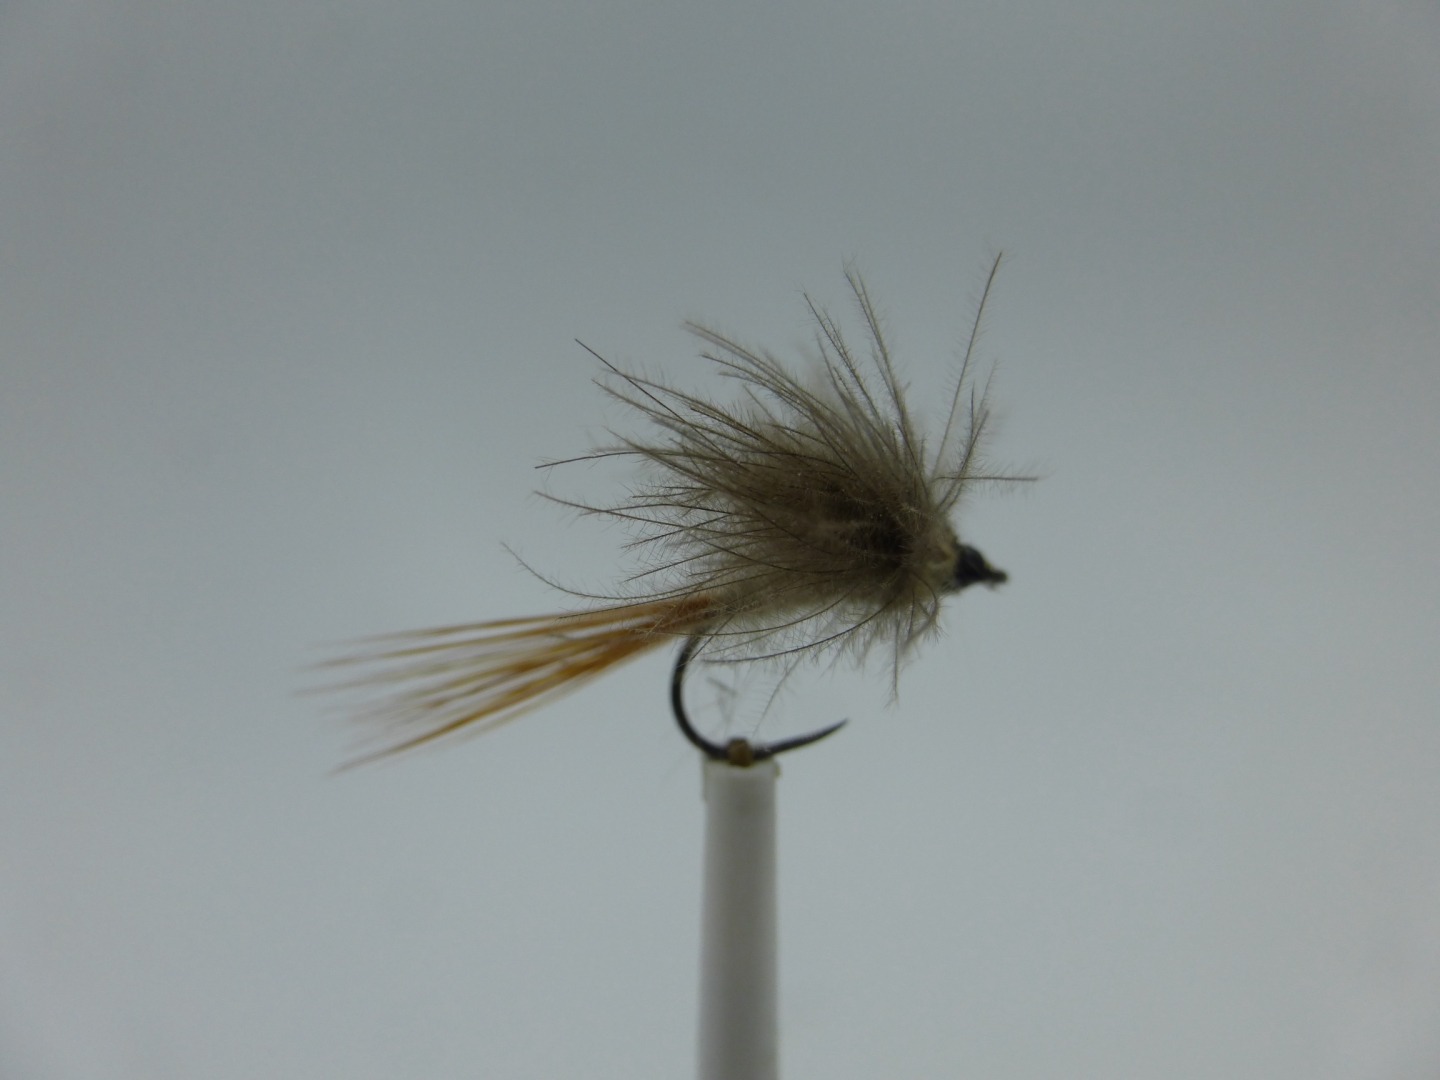 Size 14 CDC Mayfly Hare,s Ear Barbless